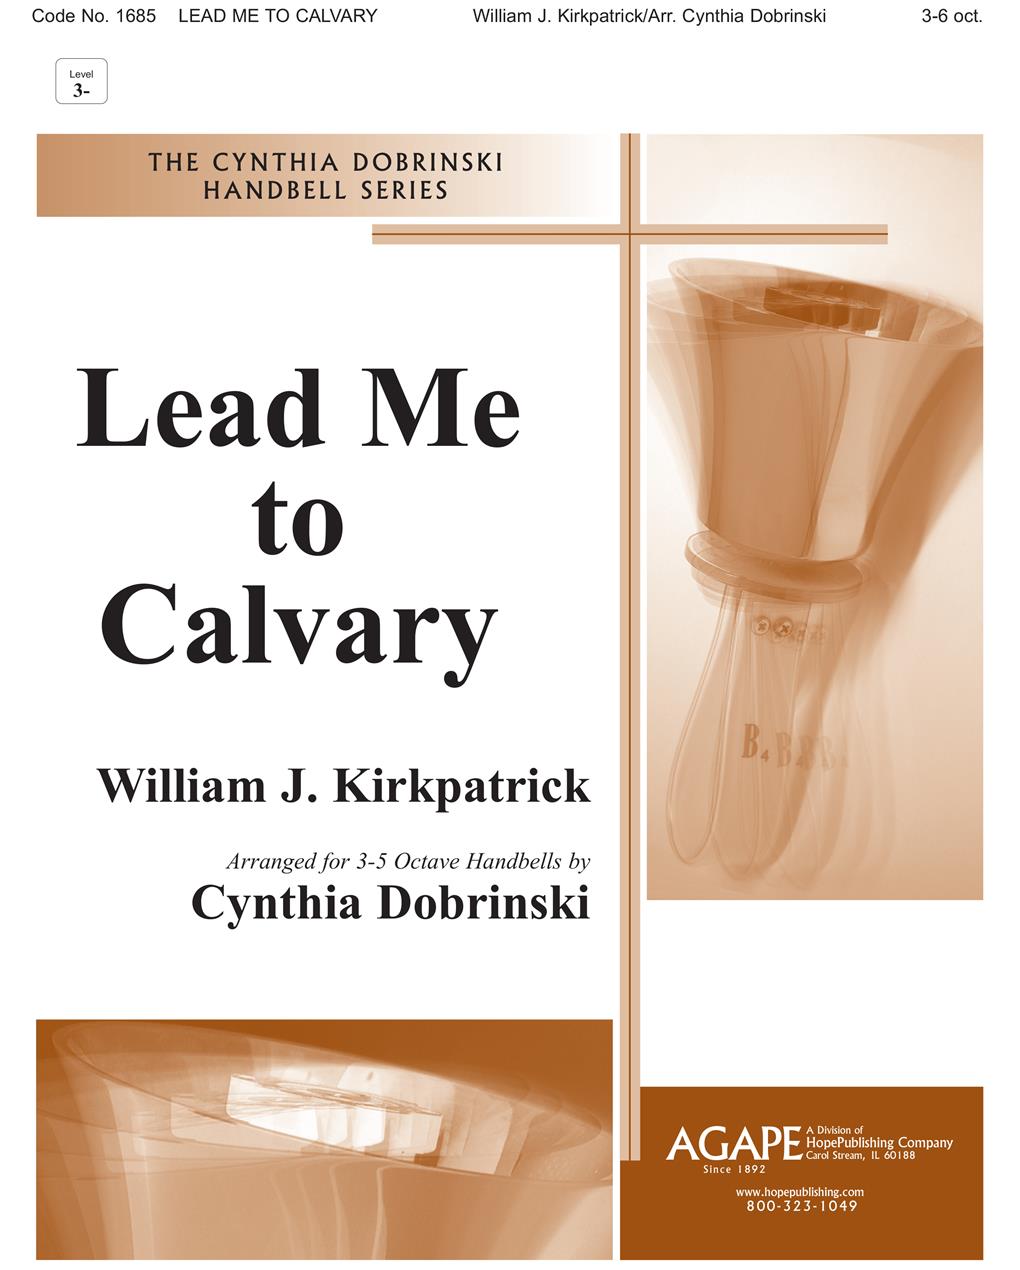 Lead Me to Calvary - 3-6 Oct. Cover Image